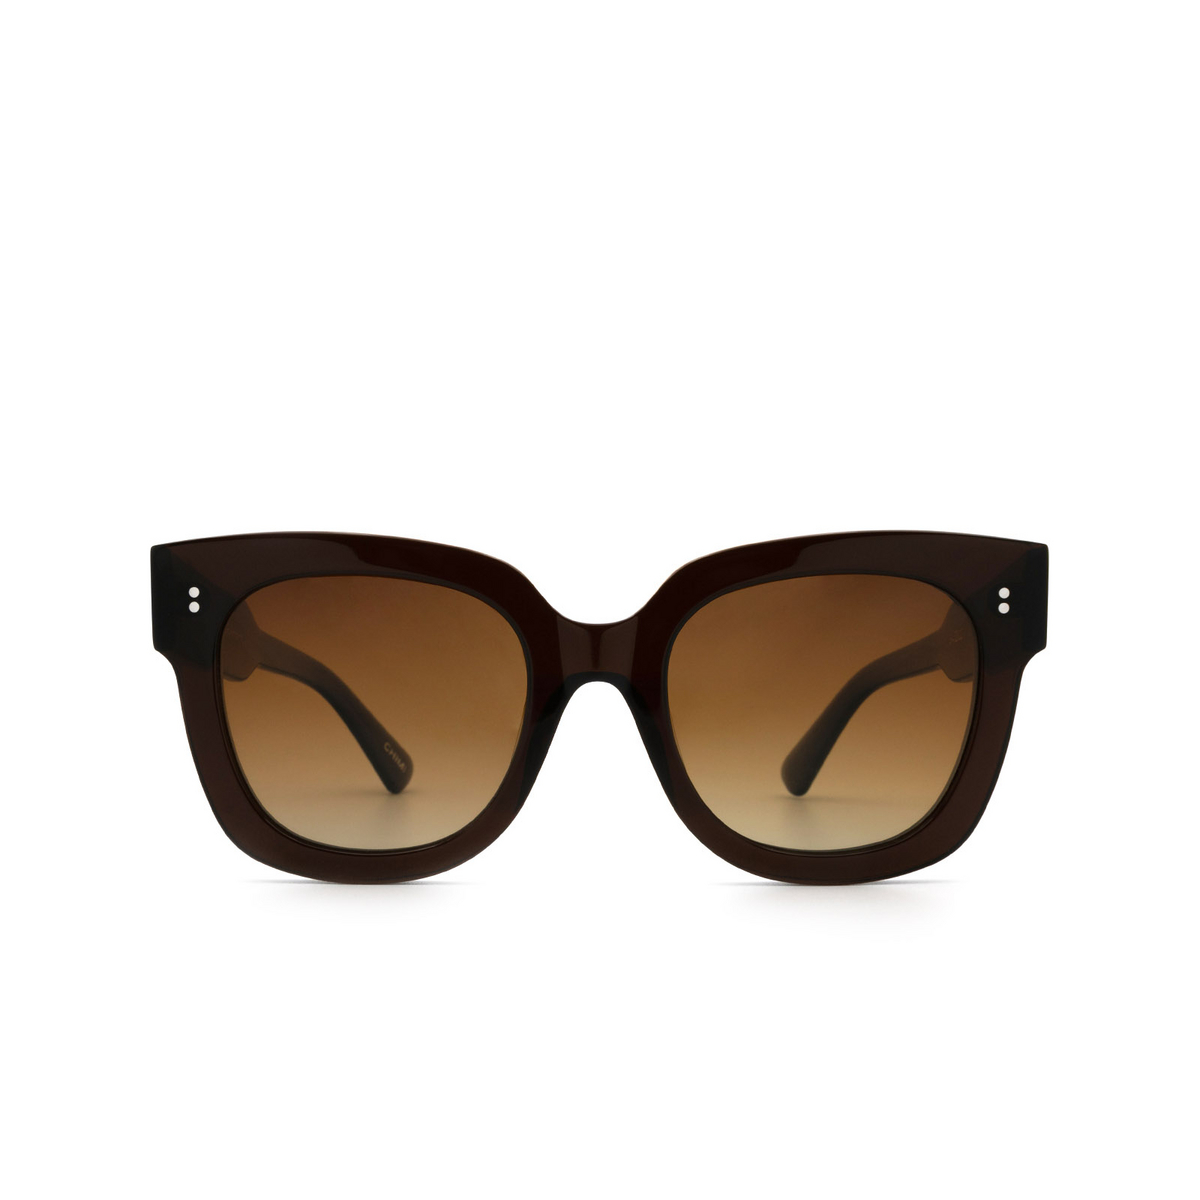 Chimi 08 Sunglasses BROWN - front view